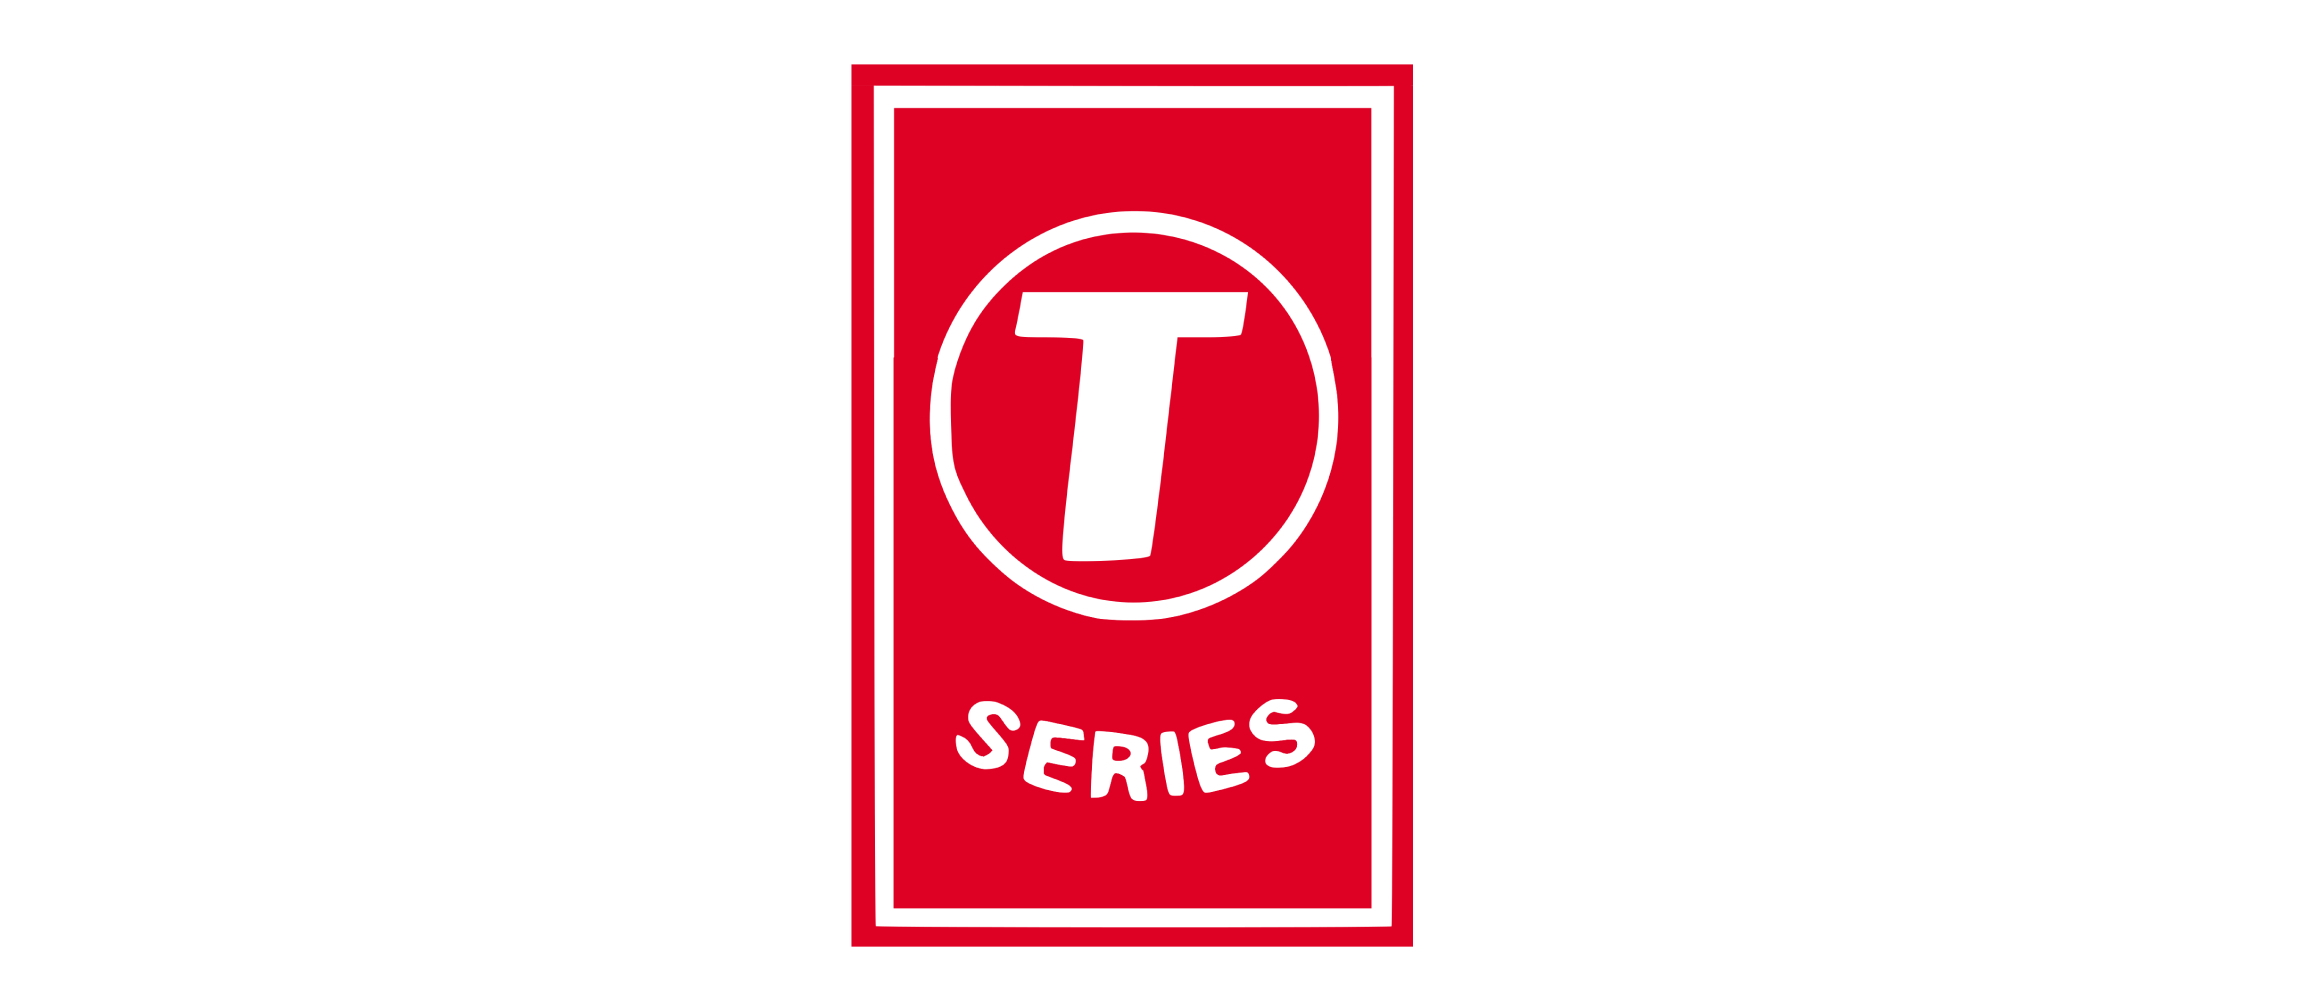 T-Series’ YouTube Channel gets over 750 million views a week